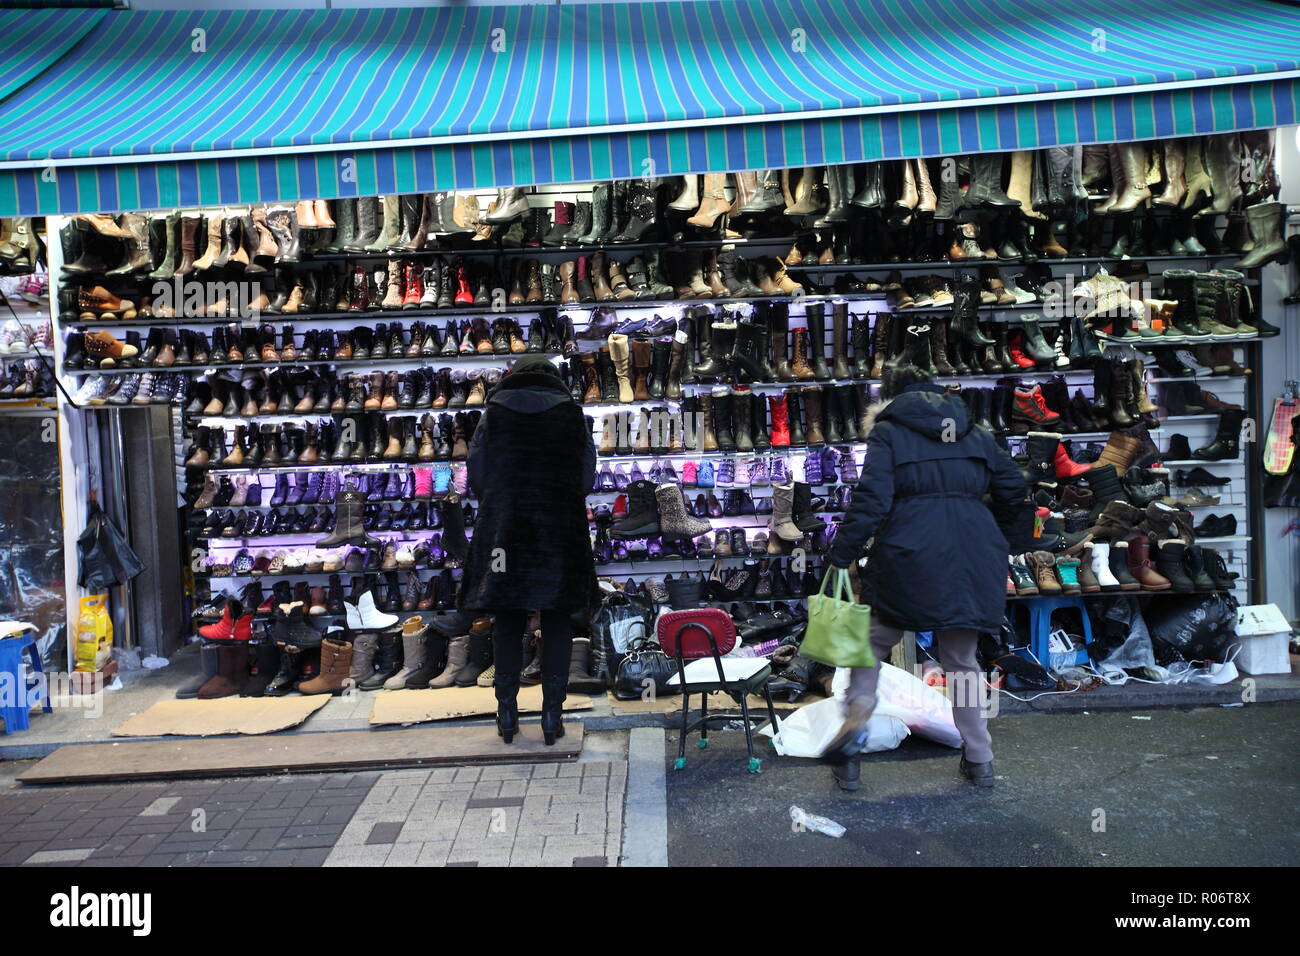 Frontage of a shoe shop business on the street of Seoul, South Korea Stock Photo